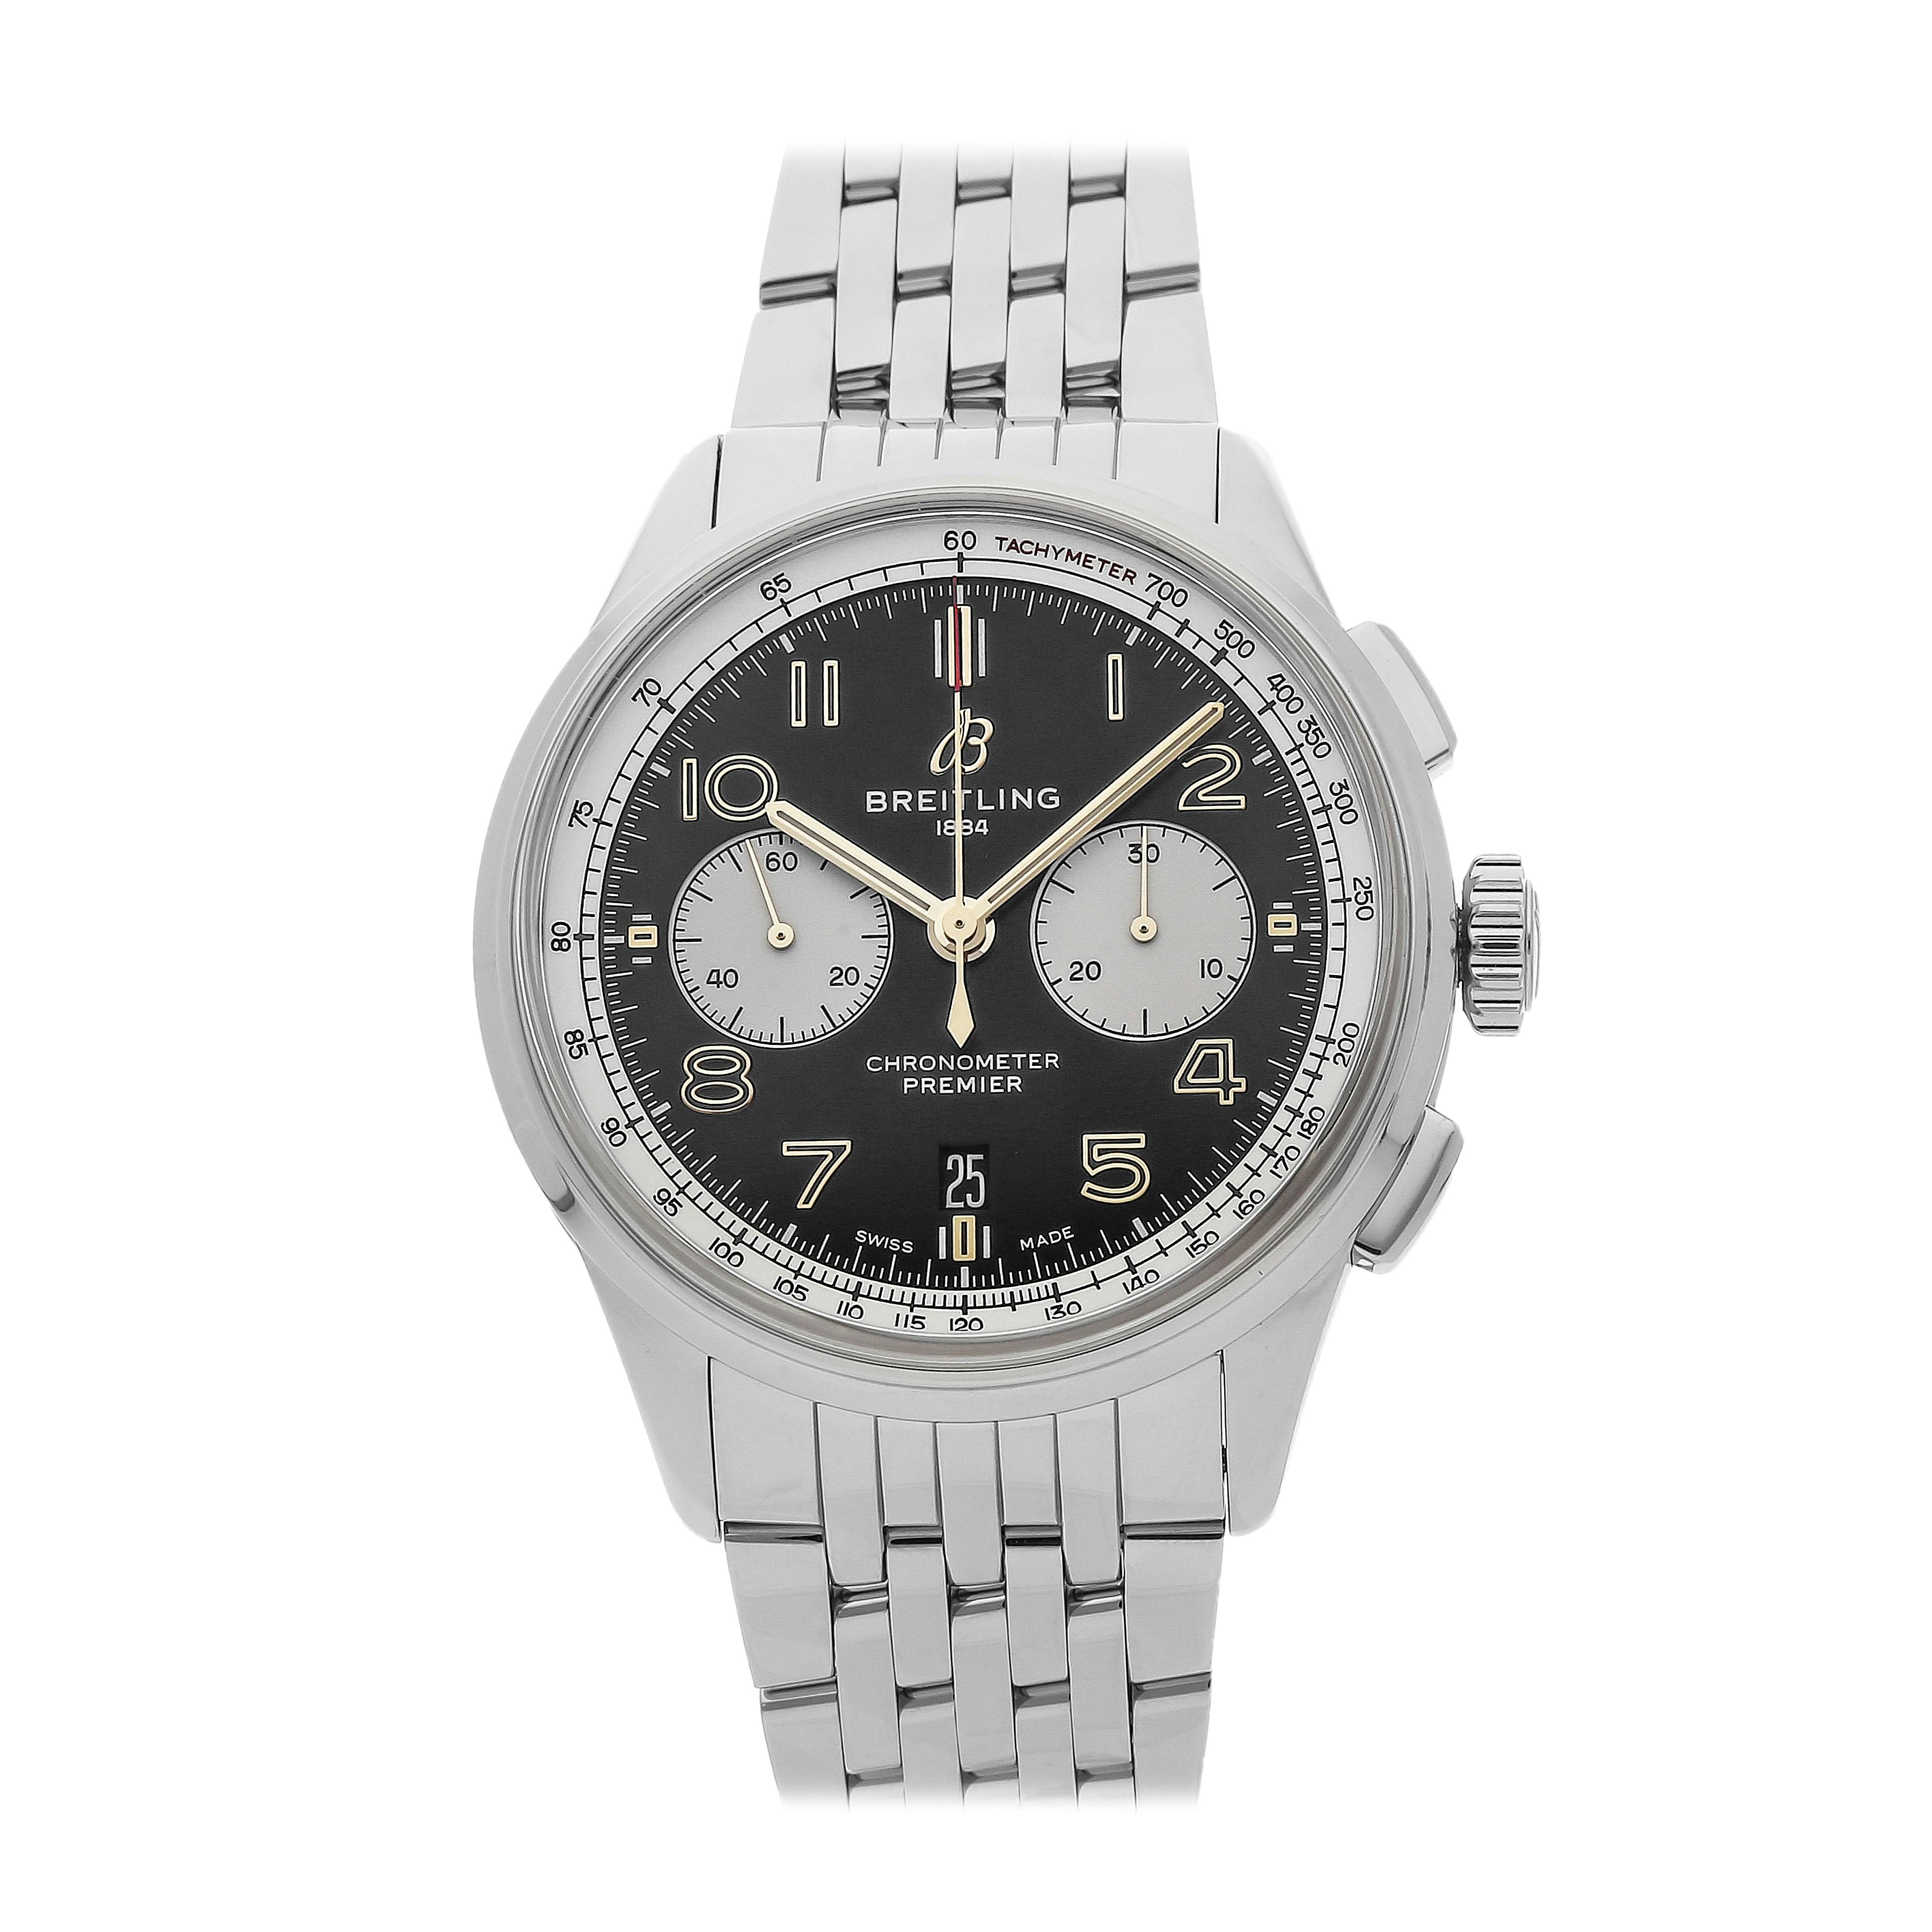 Bremont Norton V4/RR Limited Edition | Watches for men, Fashion watches,  Norton logo